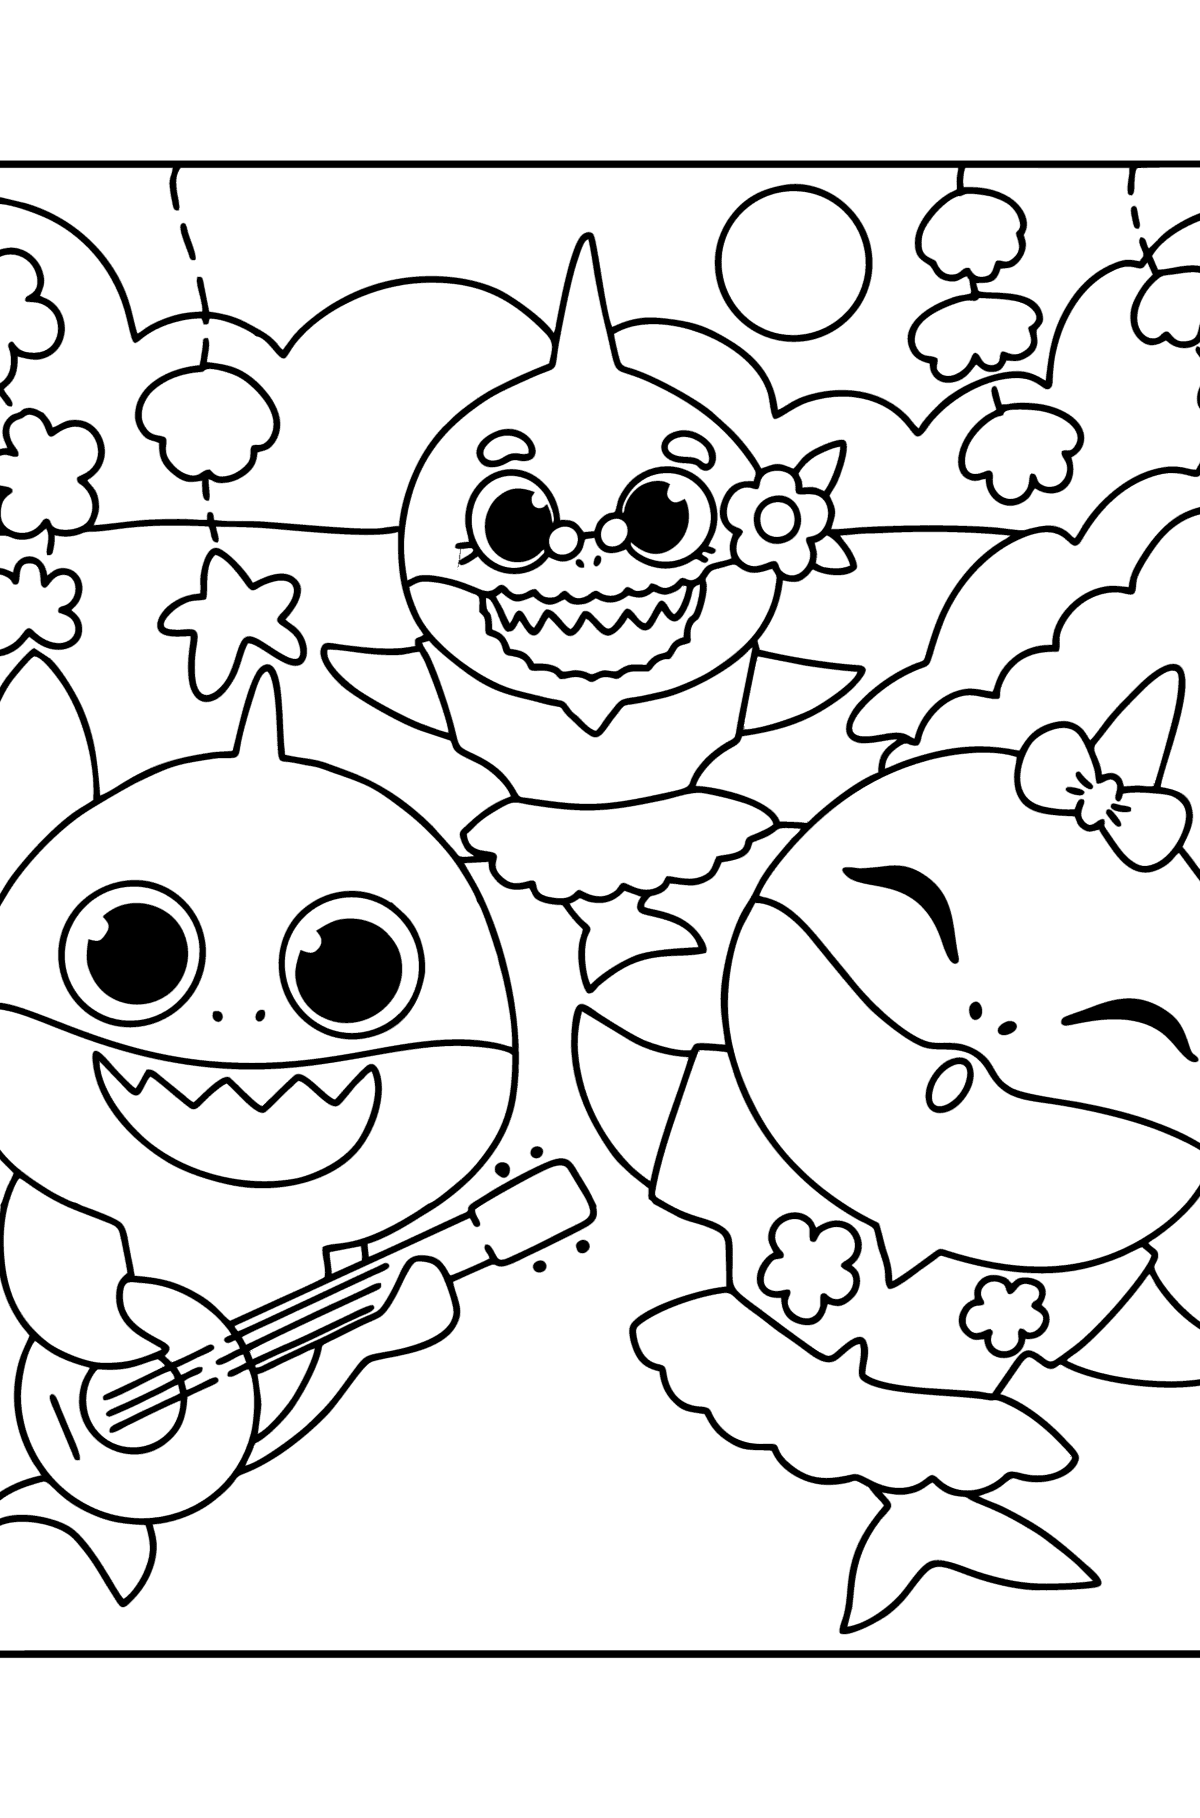 Baby shark Party coloring page - Coloring Pages for Kids